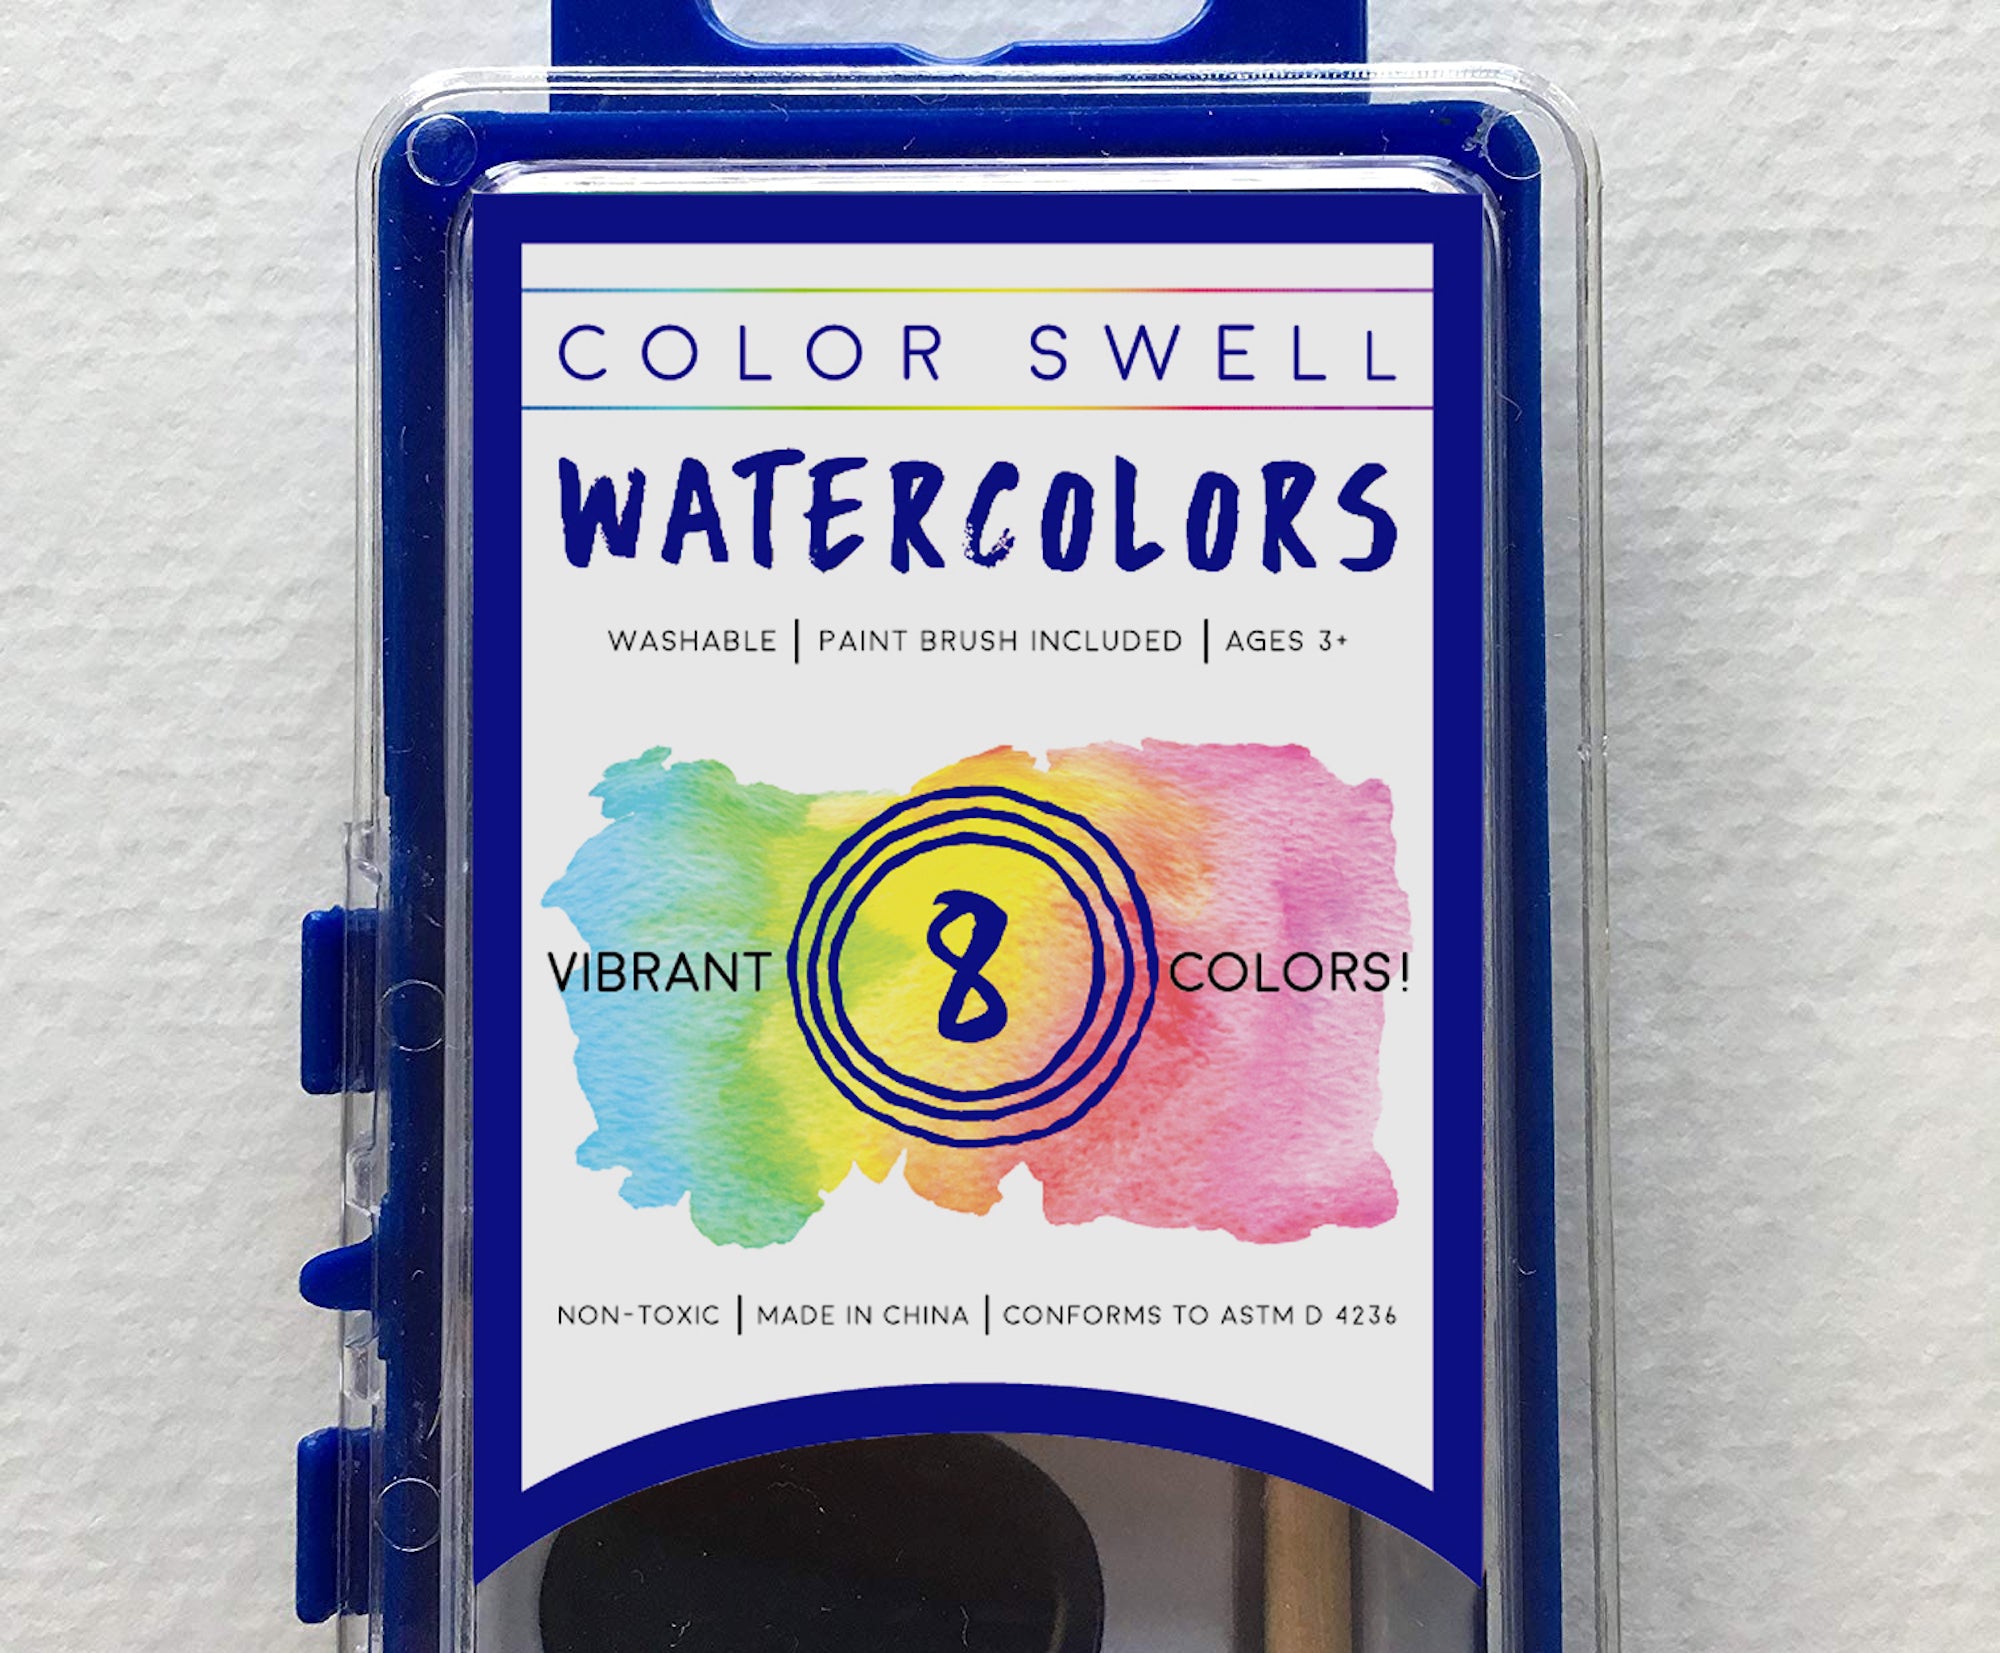 Color Swell 4 Pack Watercolor Paints with Wood Brushes 8 Colors Washable Watecolors